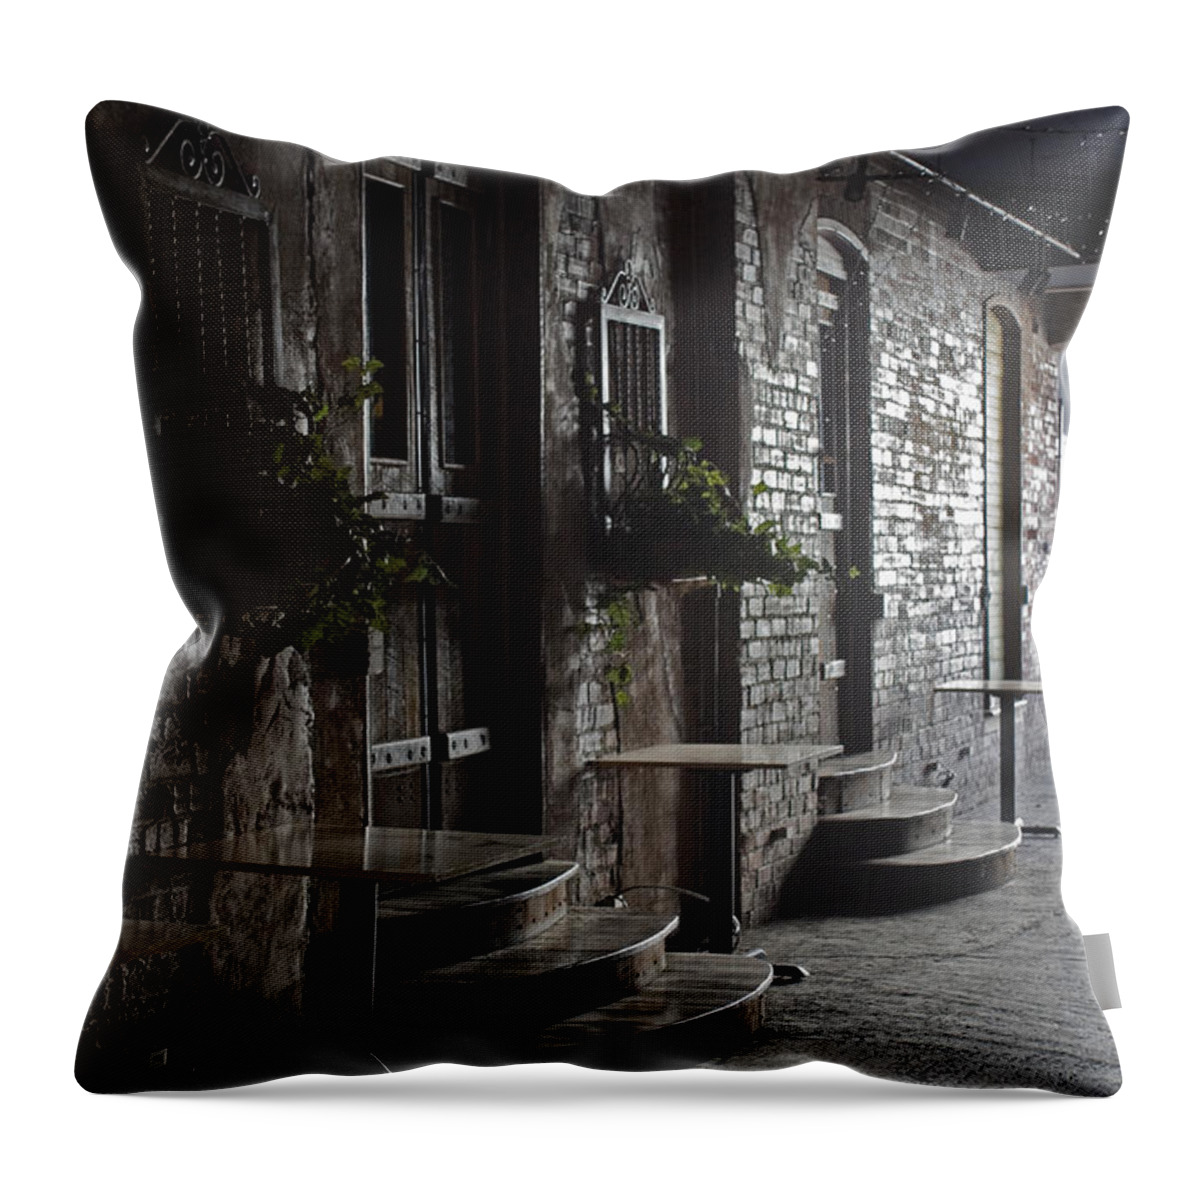 Alley Throw Pillow featuring the photograph Asheville Shops by Melinda Fawver